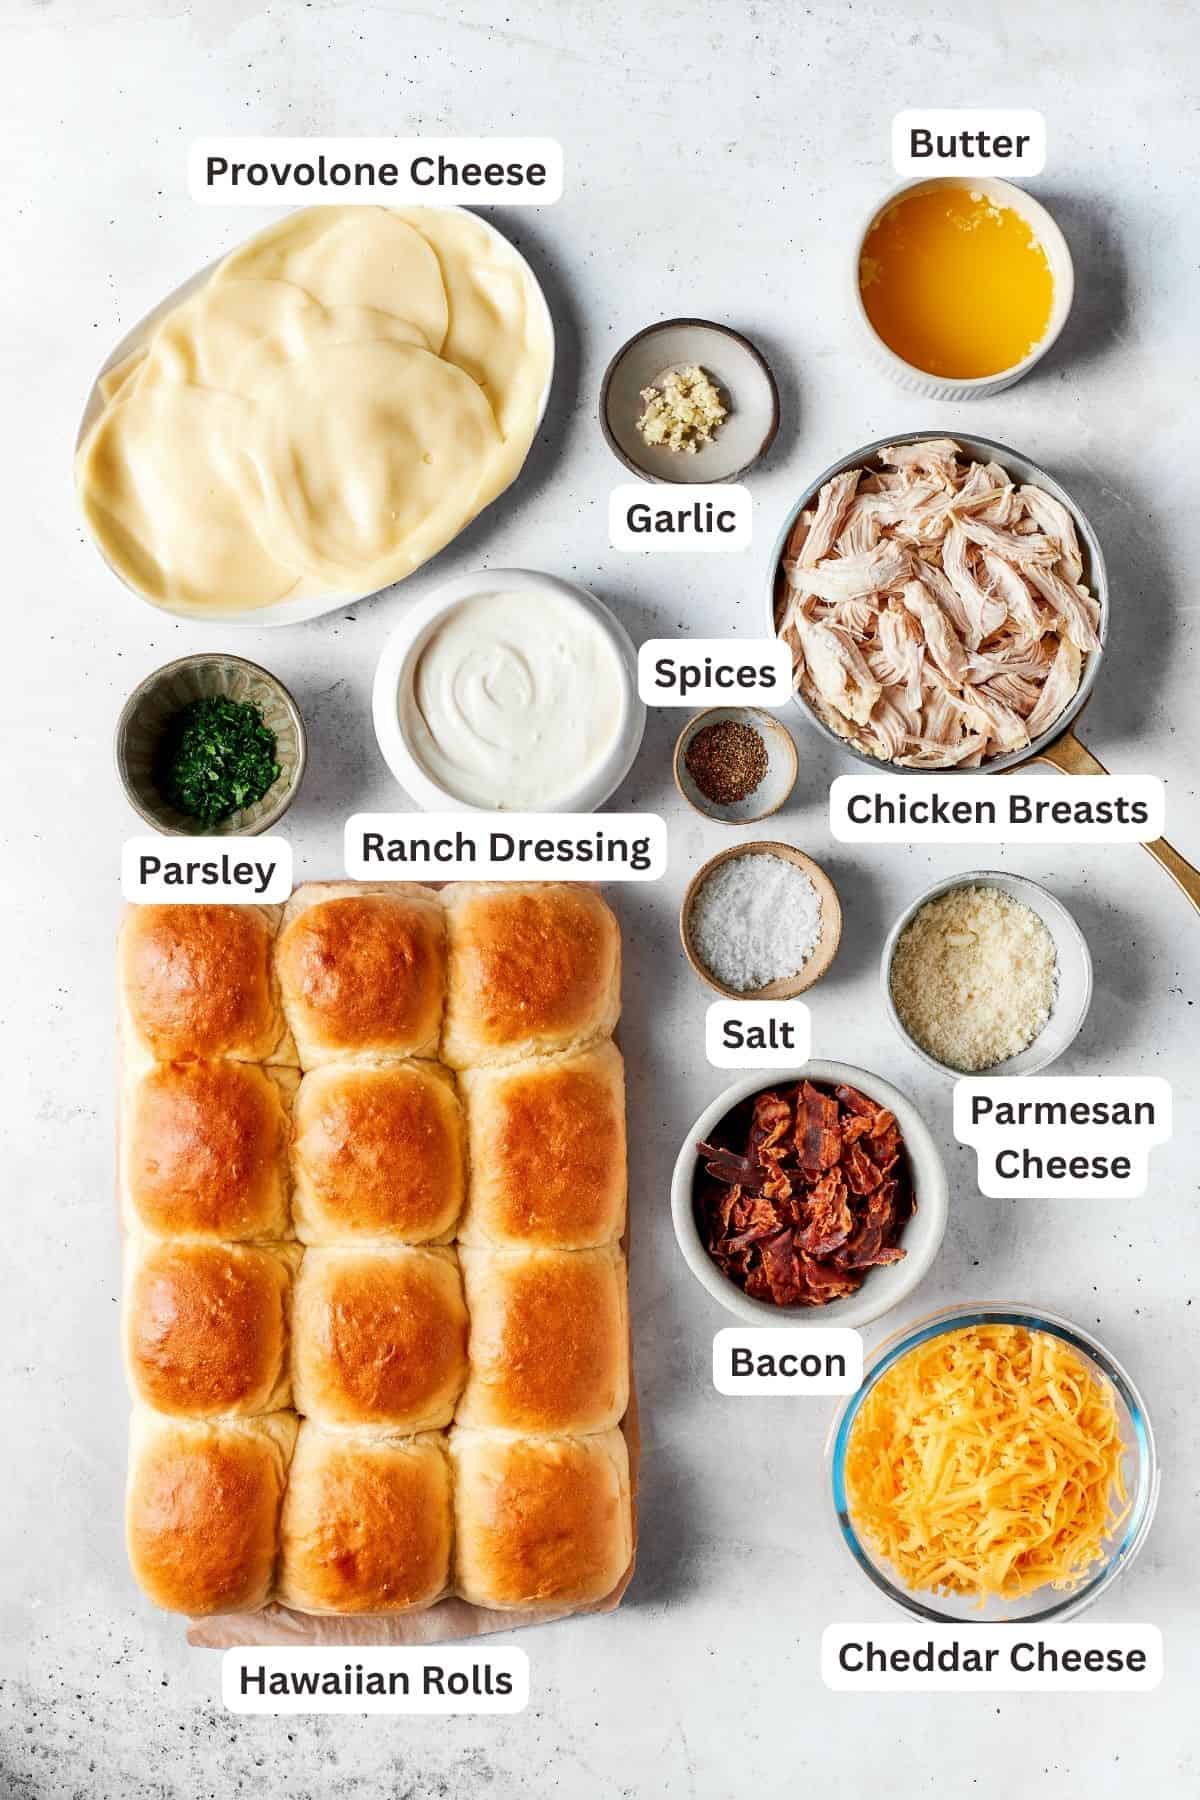 The ingredients for chicken bacon ranch sliders are shown: sweet rolls, provolone cheese, cheddar cheese, parmesan cheese, shredded chicken, salt, bacon, ranch dressing, parsley, garlic, spices.